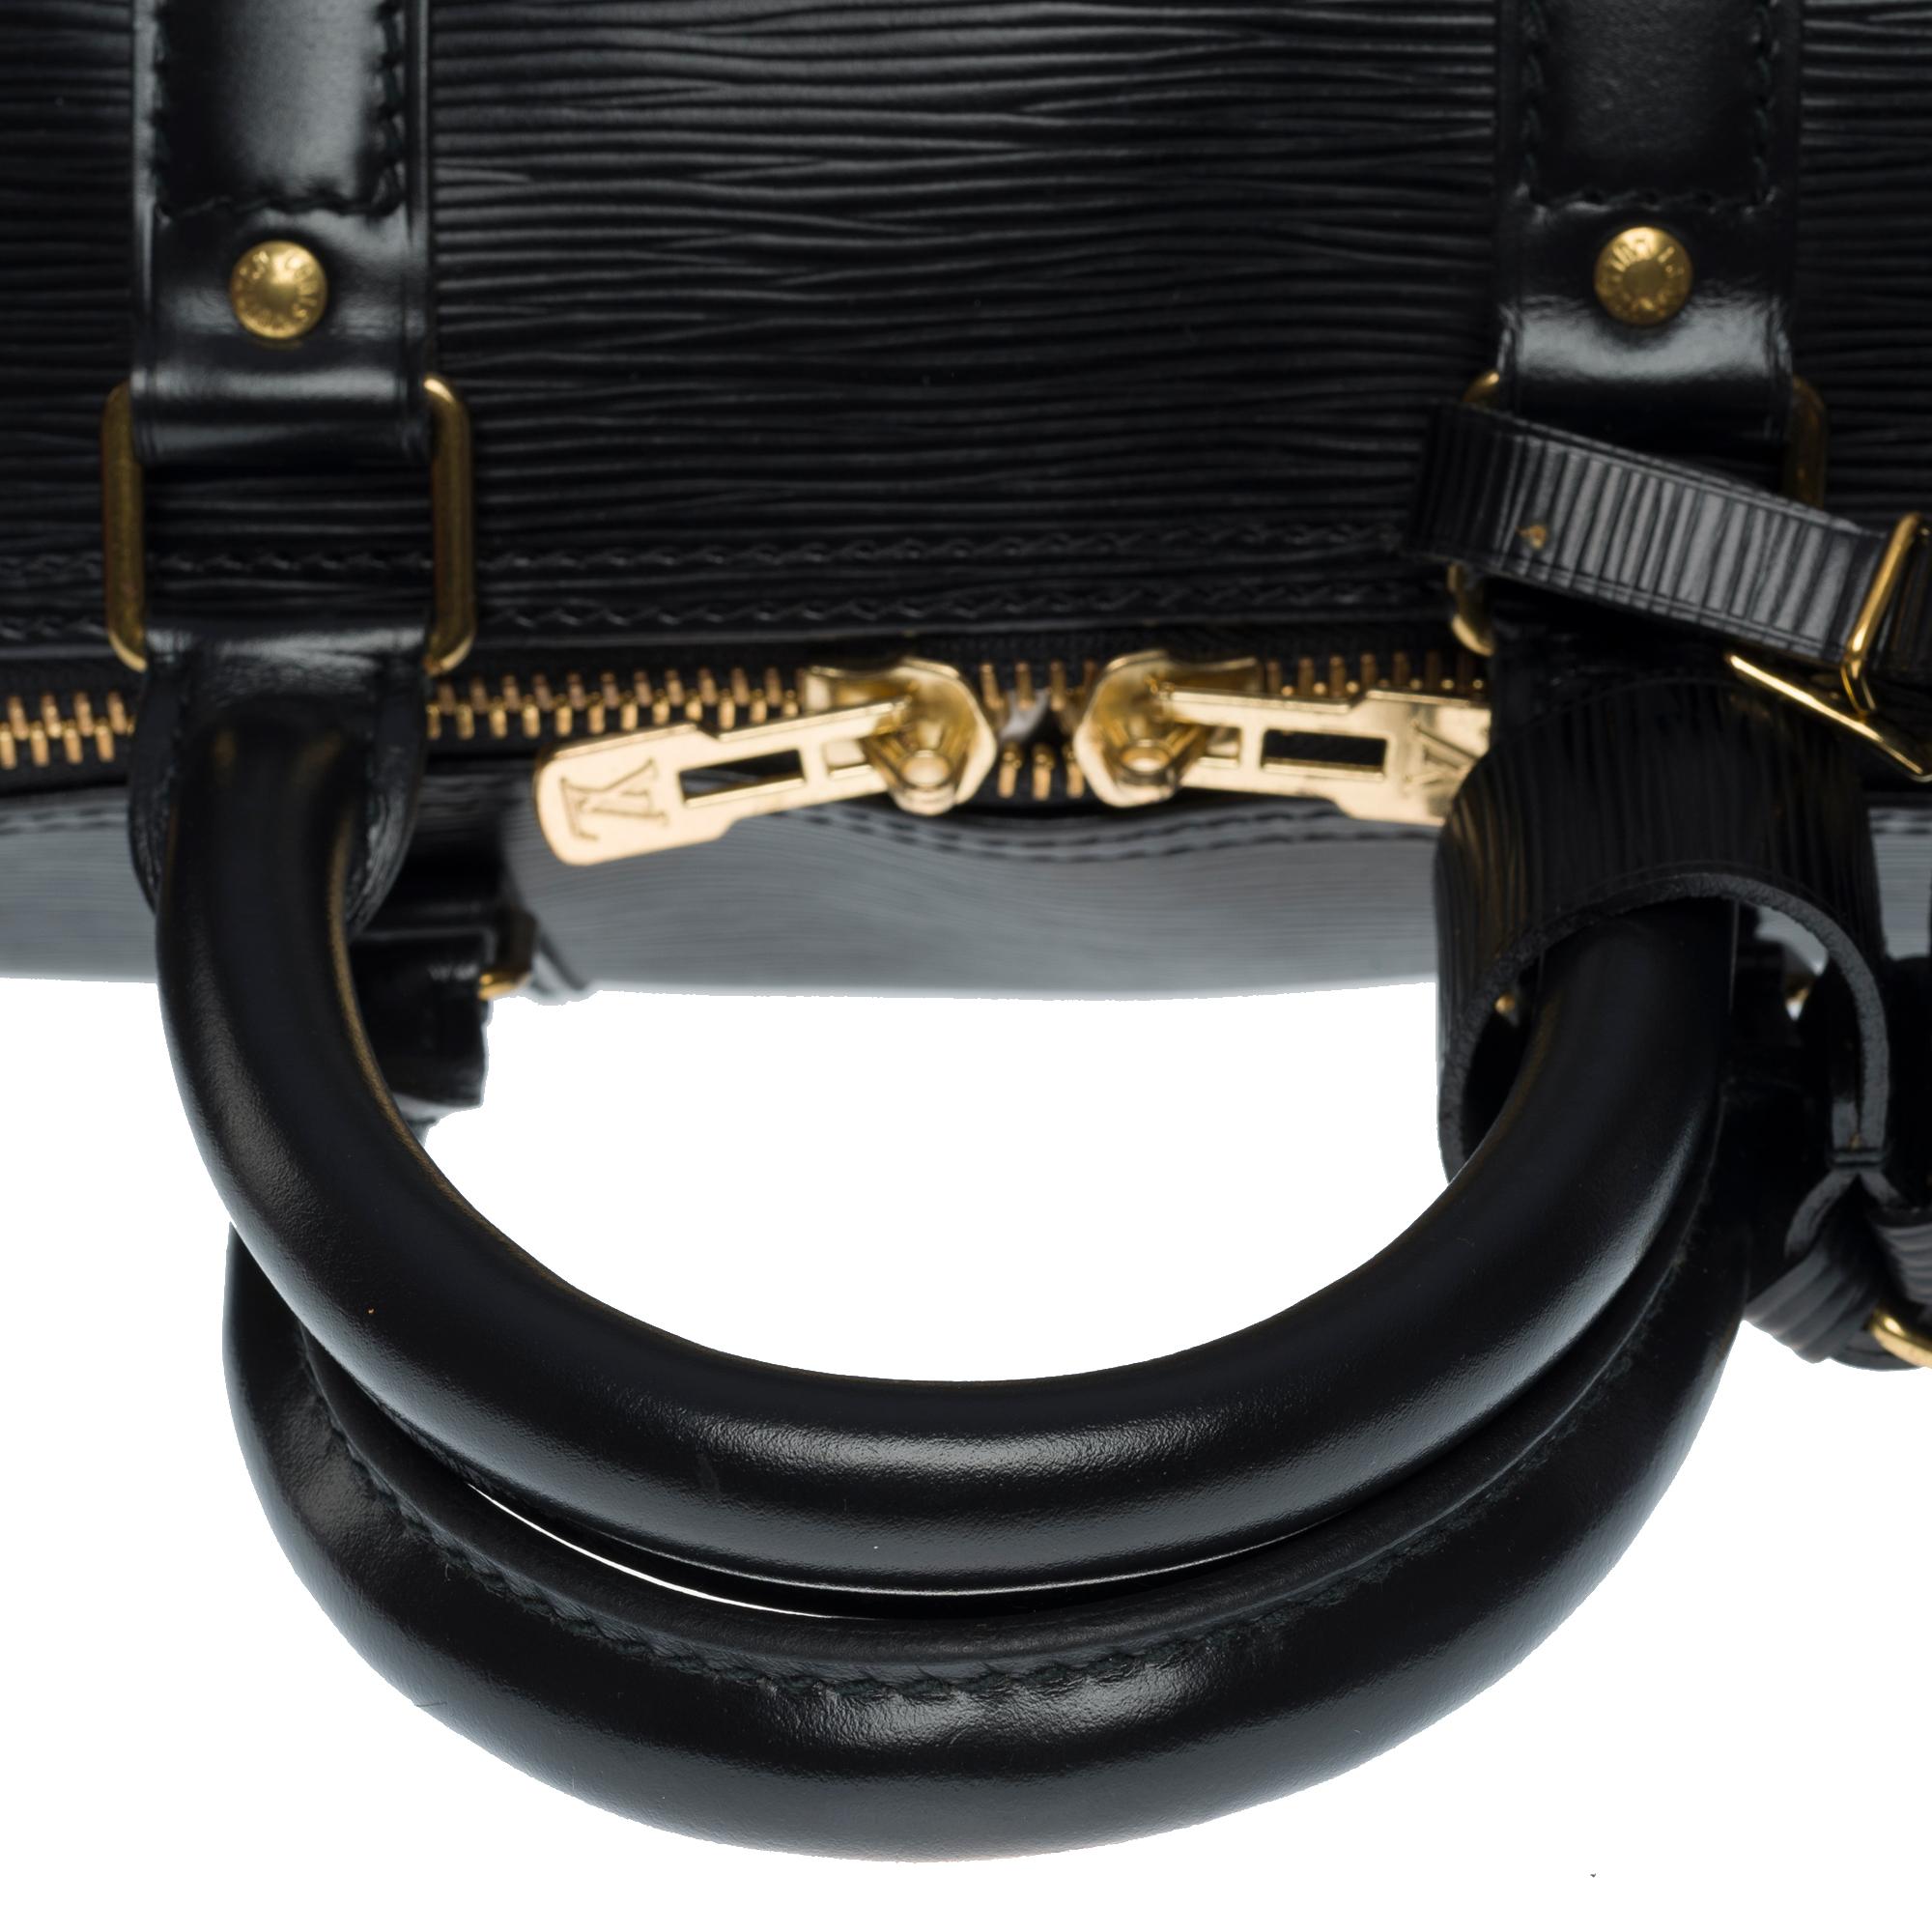 The very Chic Louis Vuitton Keepall 45 Travel bag in black epi leather, GHW 5